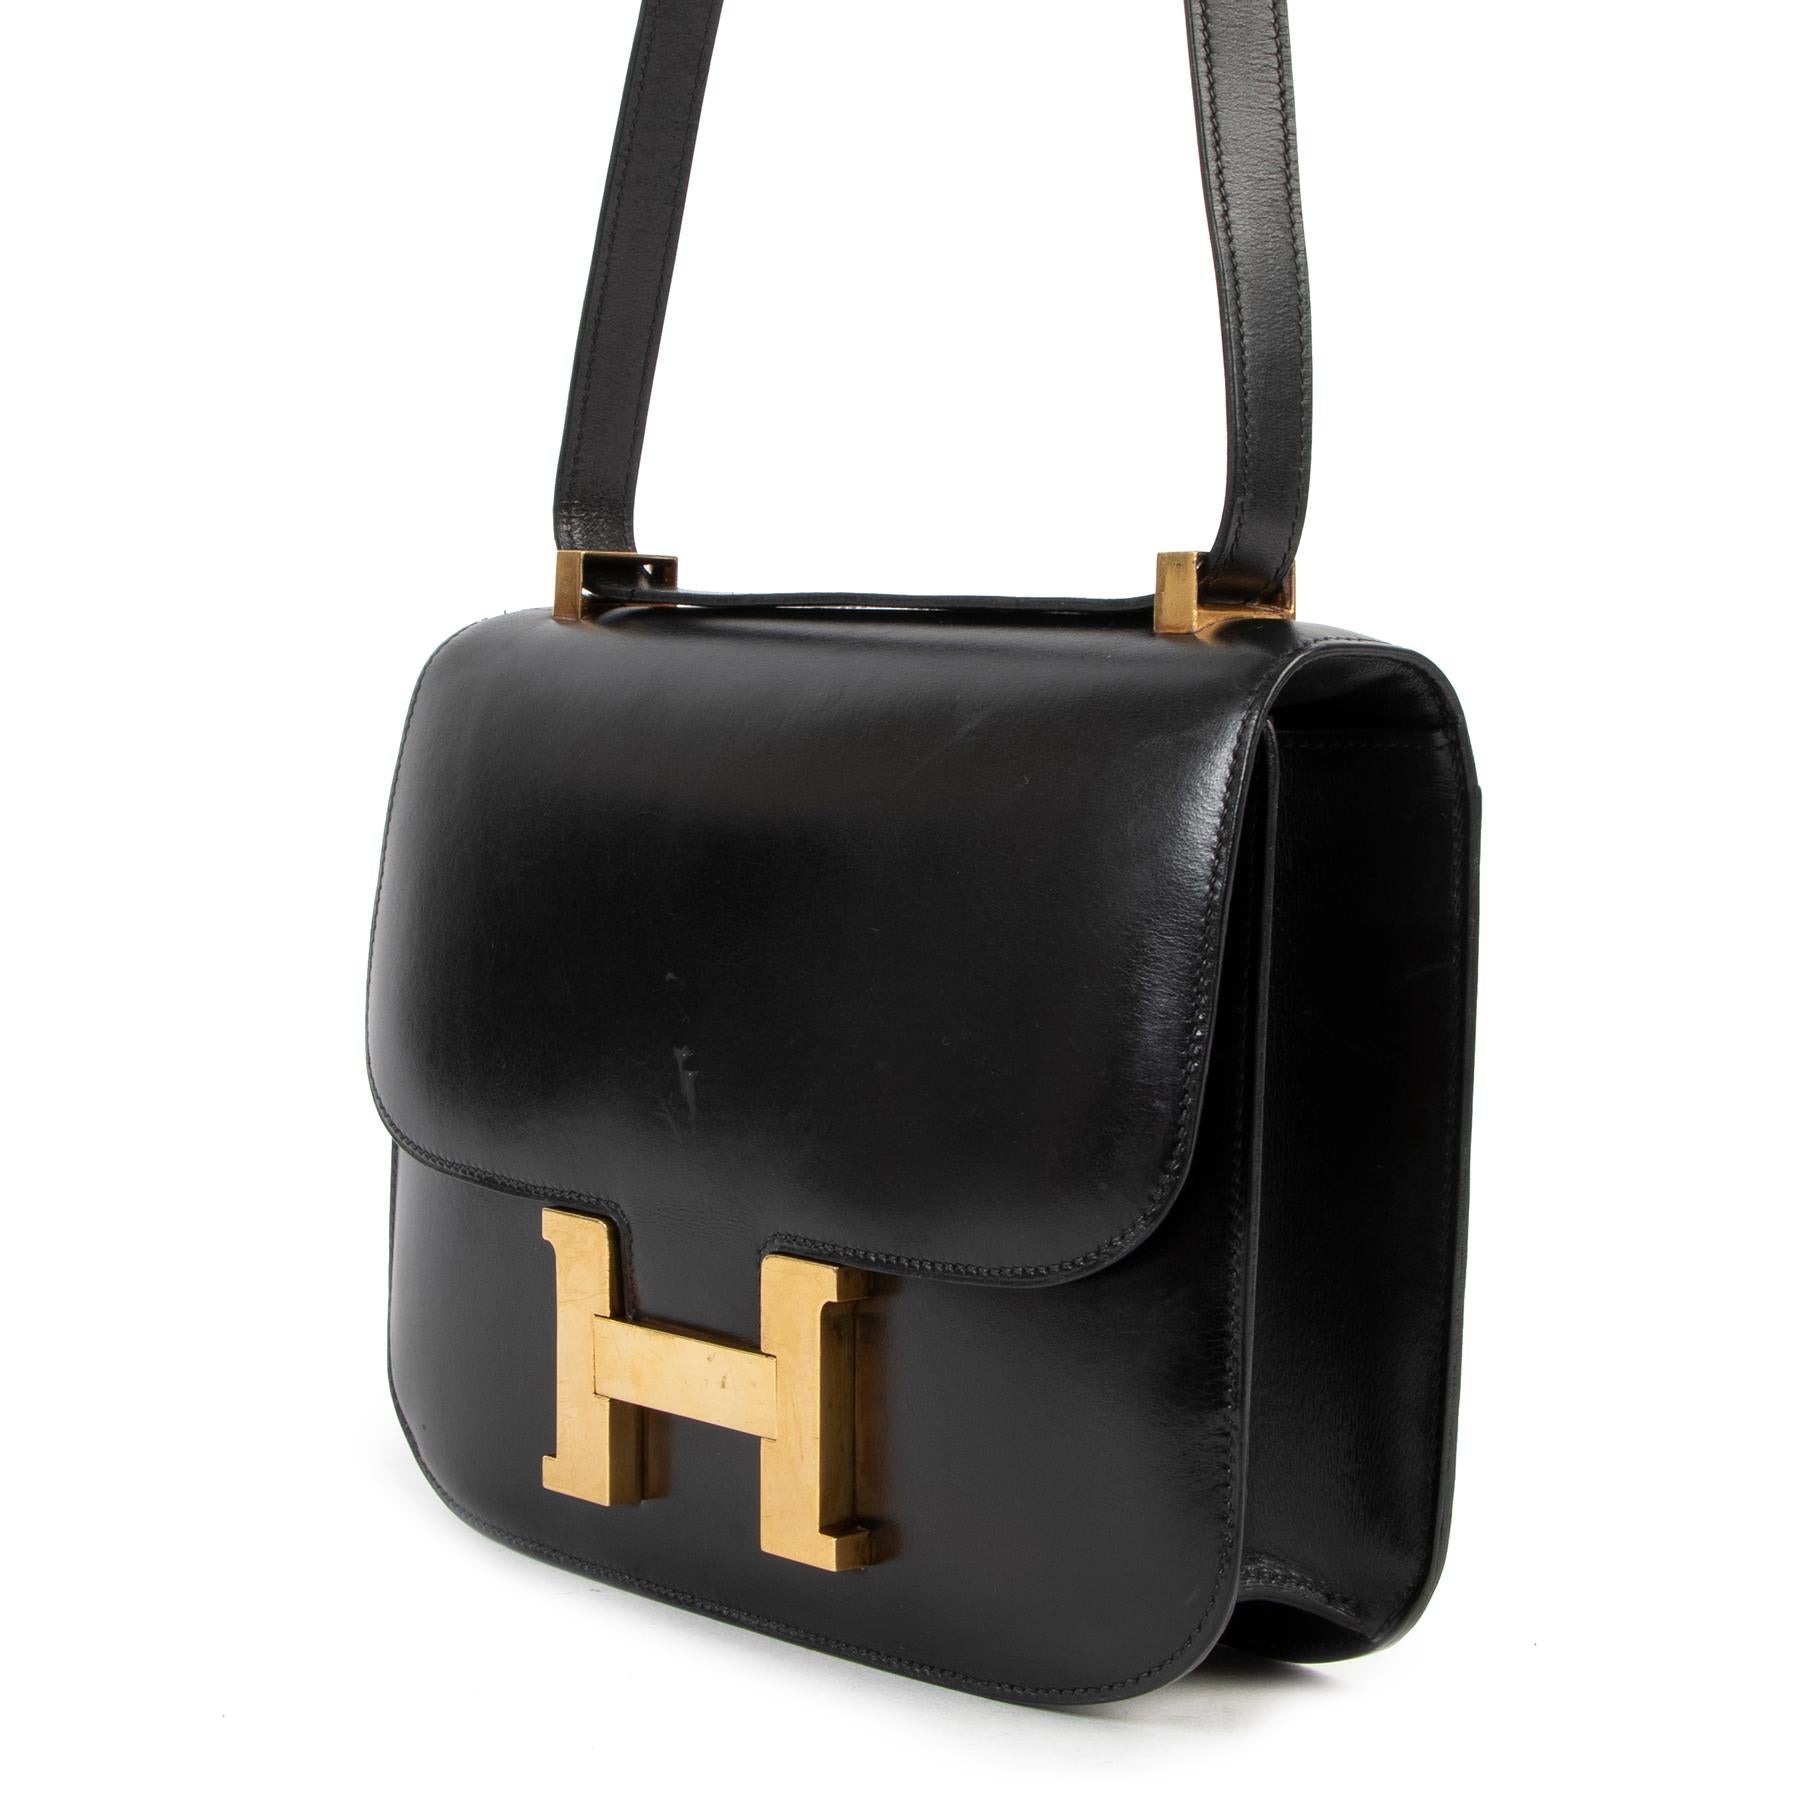 Hermès Vintage Constance 23 Black Box Gold Hardware

Hermès Constance stays one of the most coveted handbag designs in the history and is equally desired as Hermès Birkin and Hermès Kelly bags.

This hard-to-find Hermès Constance 23 is practical and